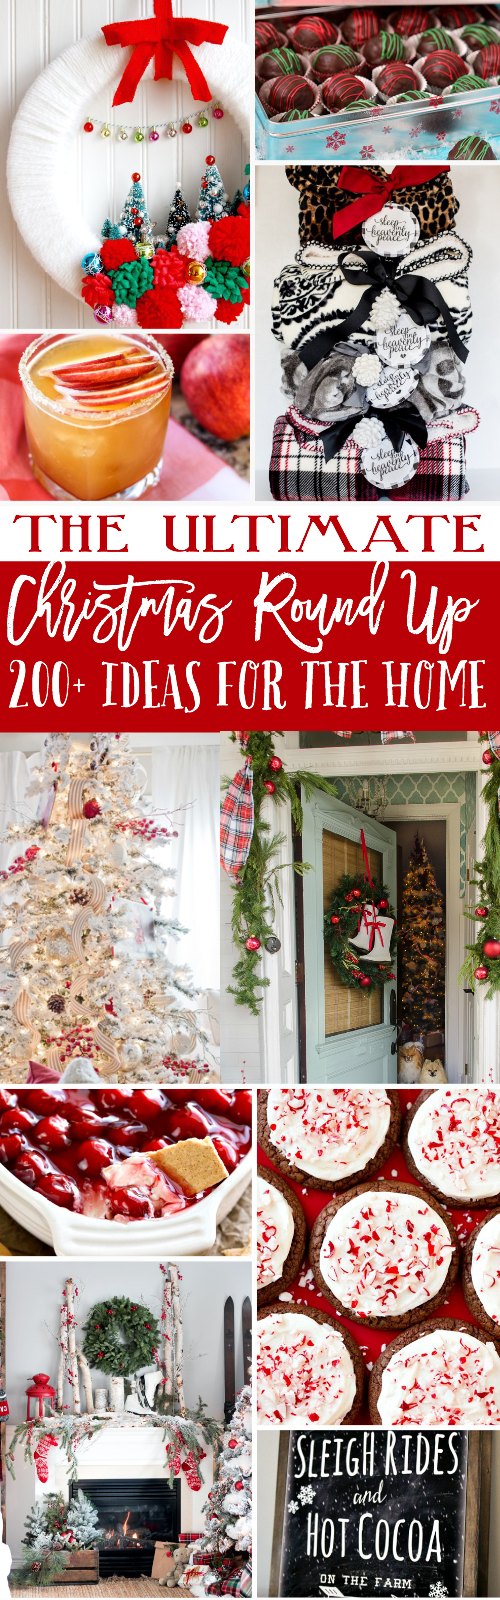 the-ultimate-christmas-round-up-with-200-ideas-for-the-home-gifts-and-things-to-bake